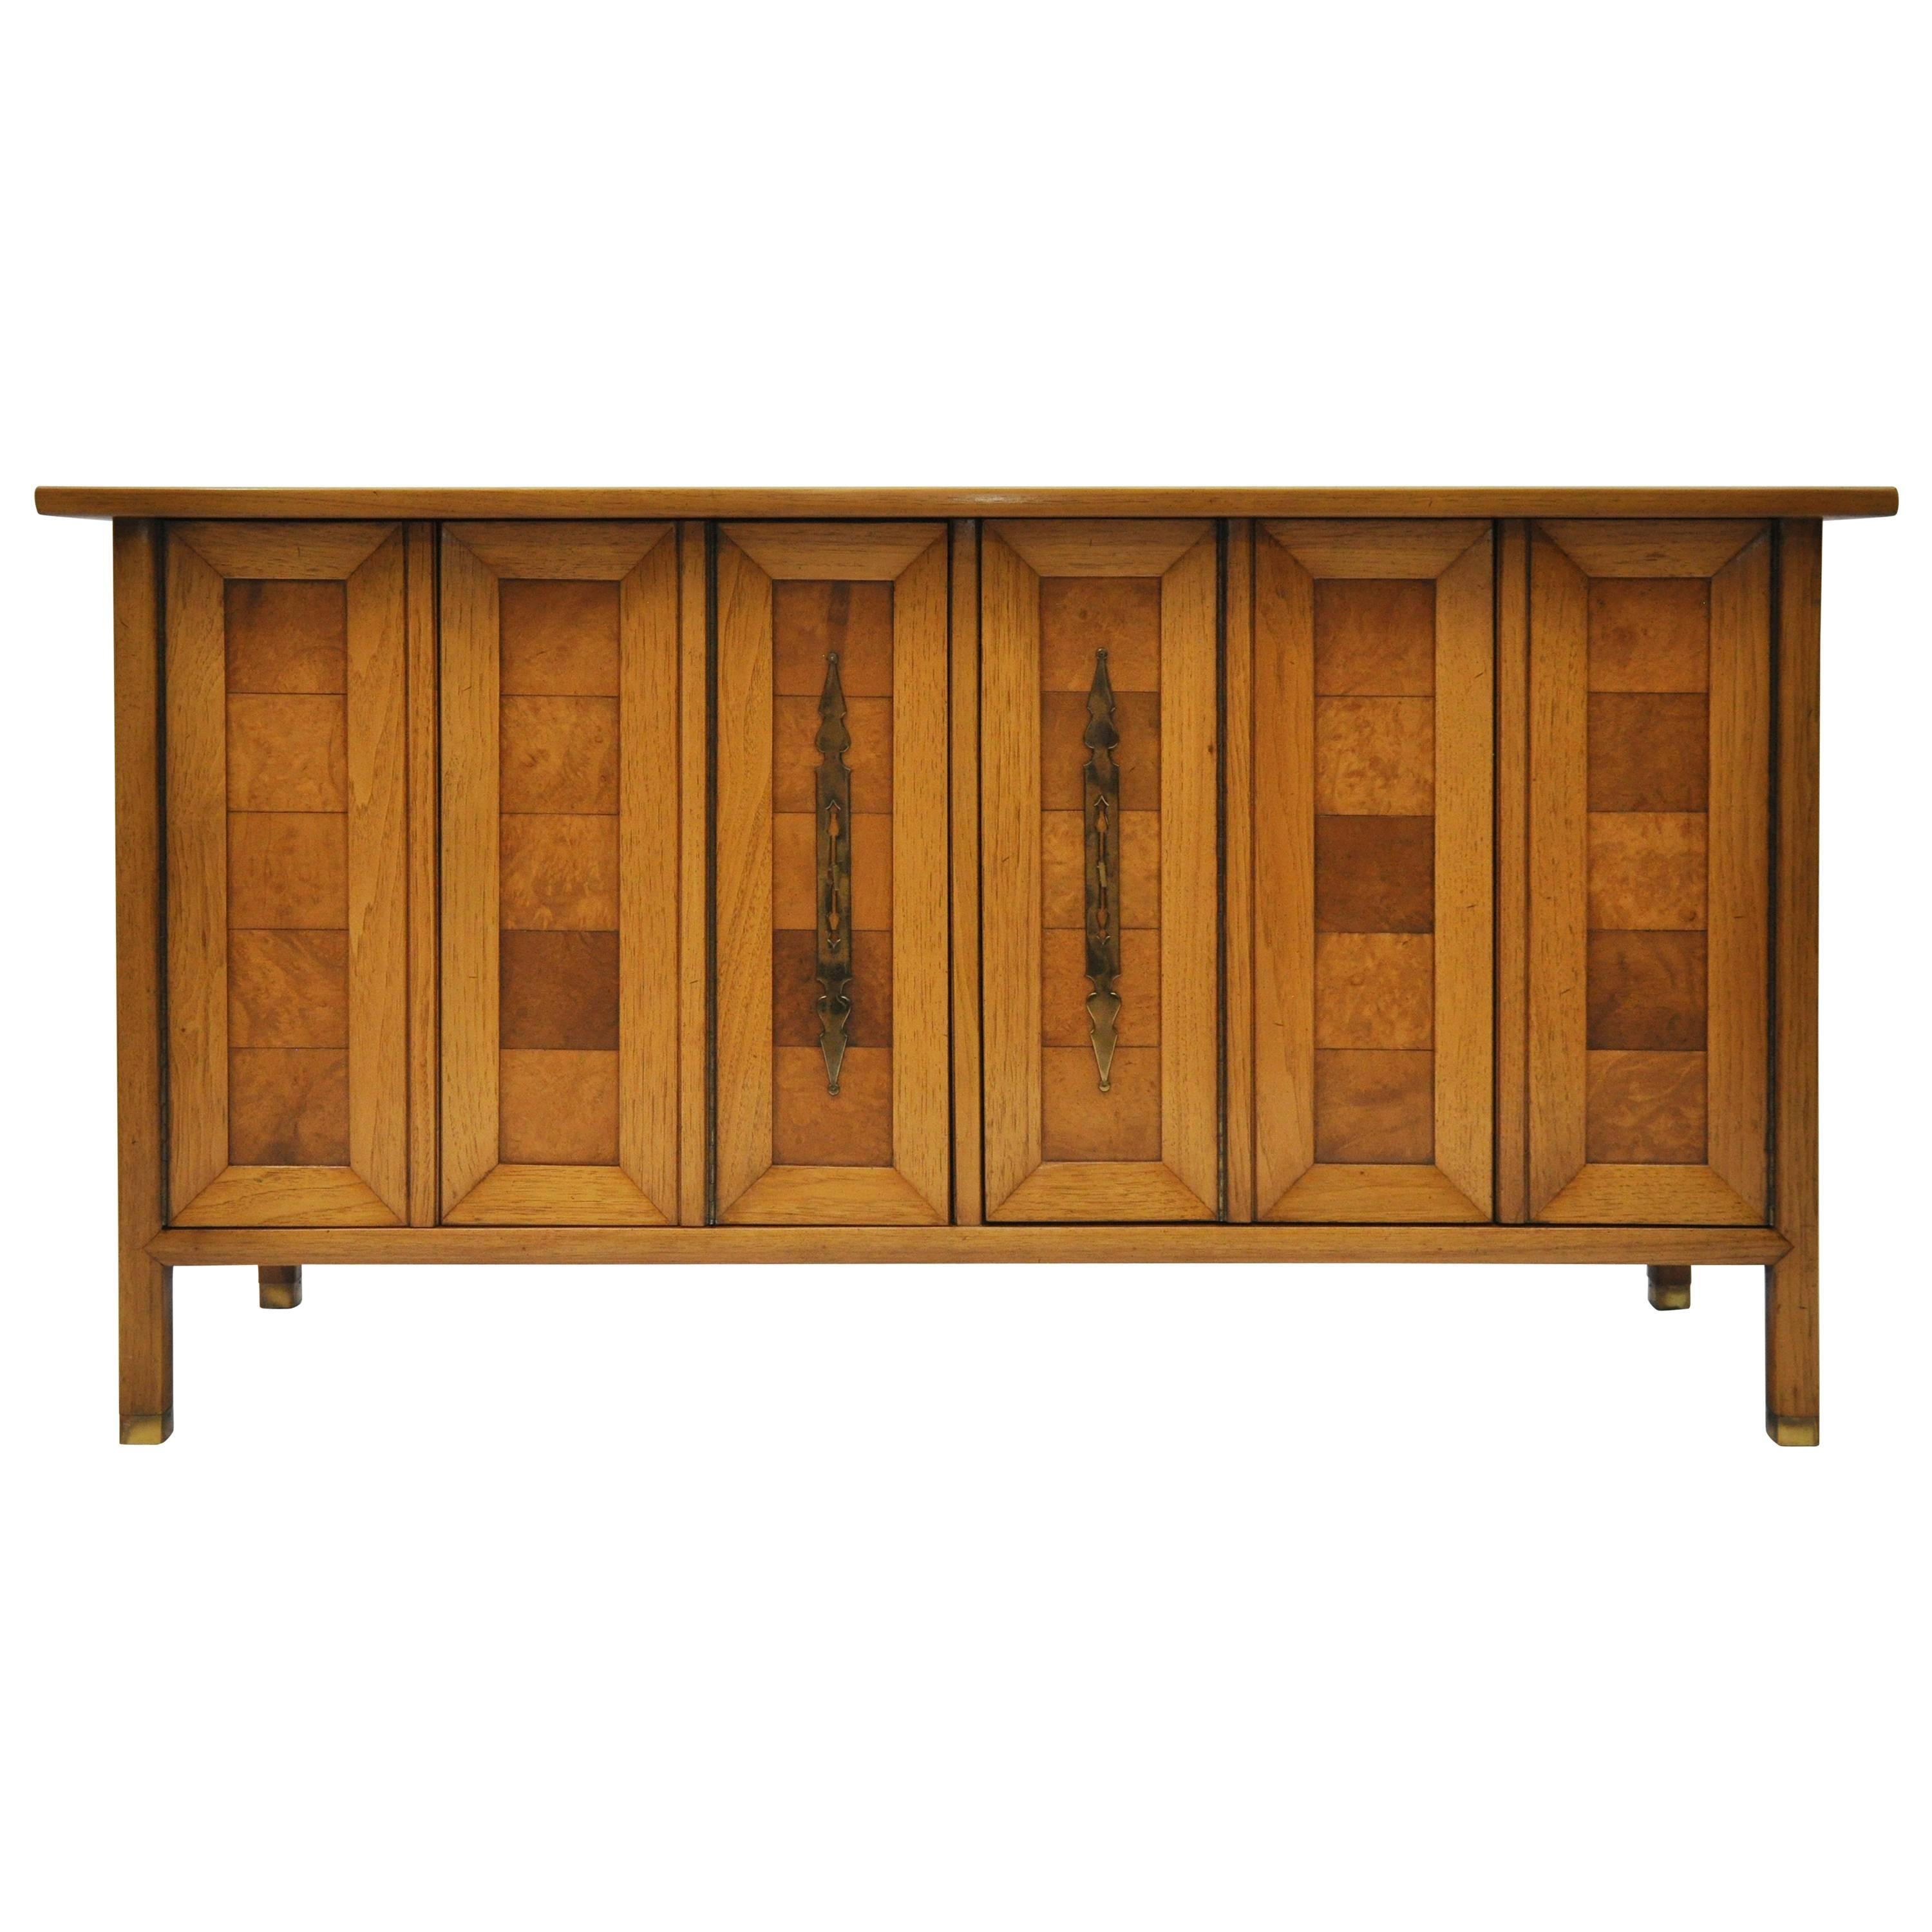 Tomlinson Mid-Century Pecan and Butternut Sideboard with Burl Myrtlewood Doors For Sale